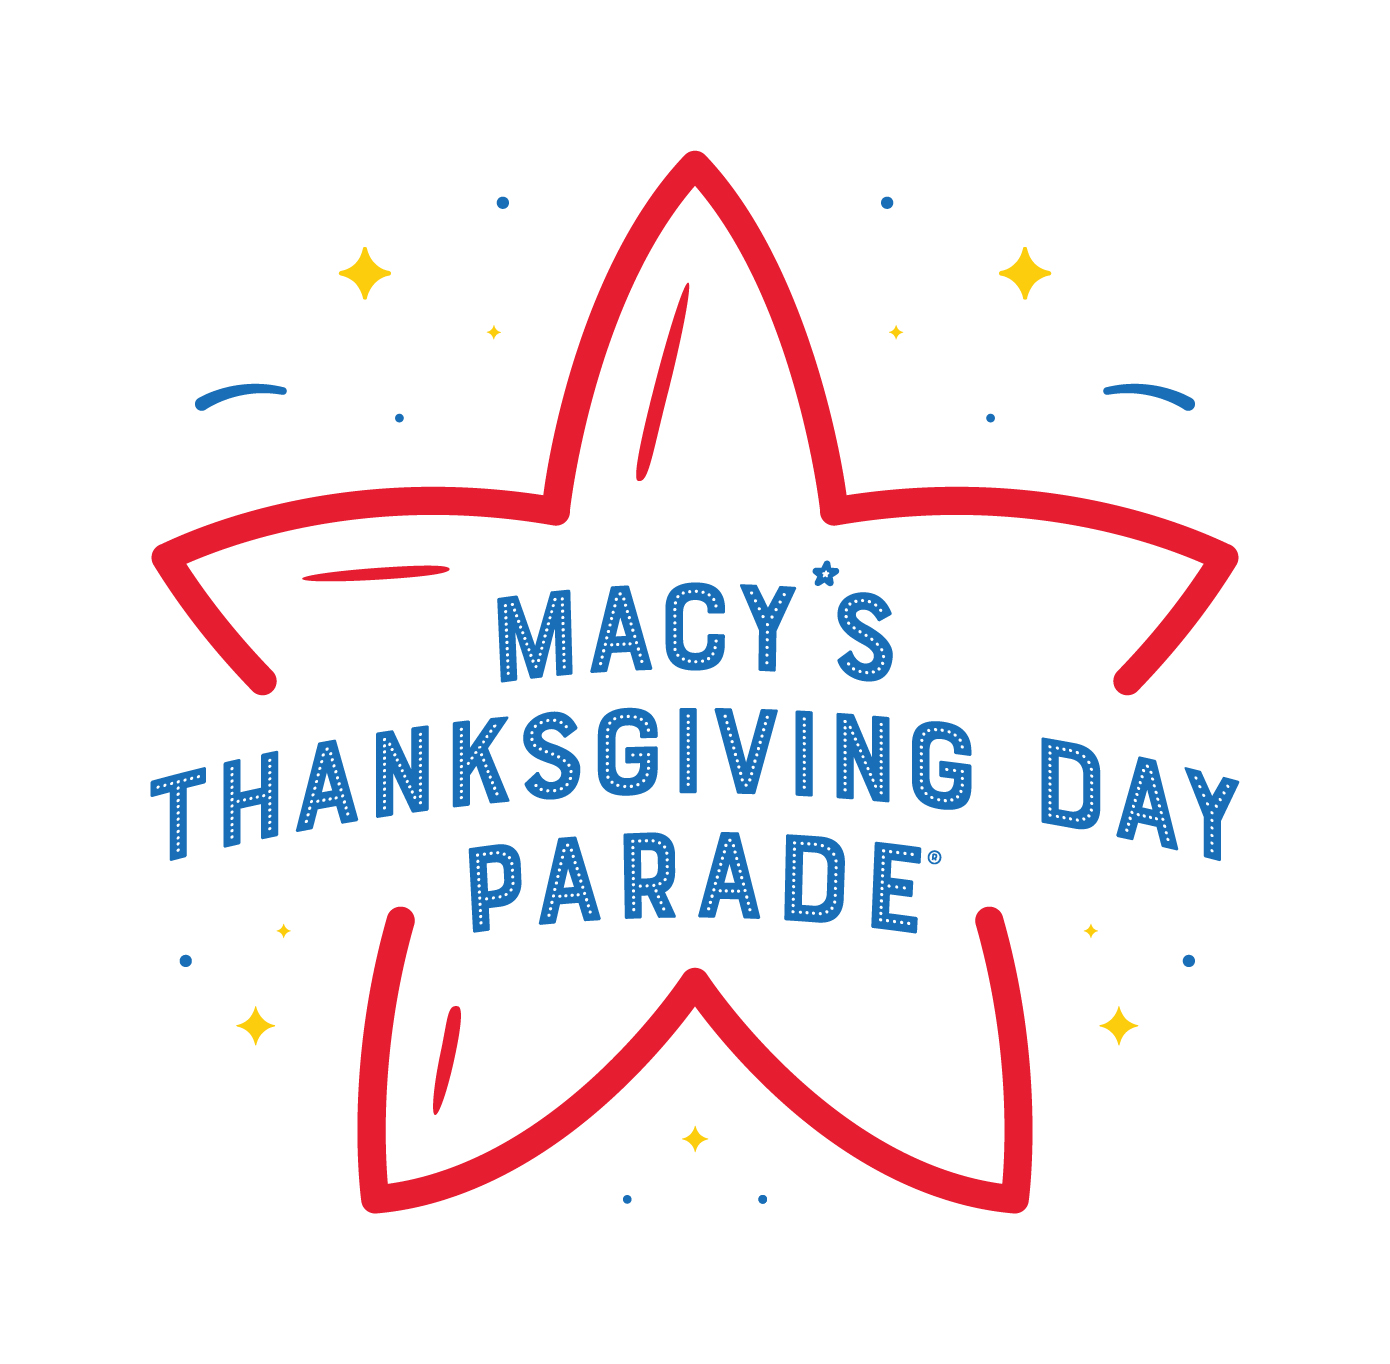 Worldfamous Macy's Thanksgiving Day Parade ushers in holiday season